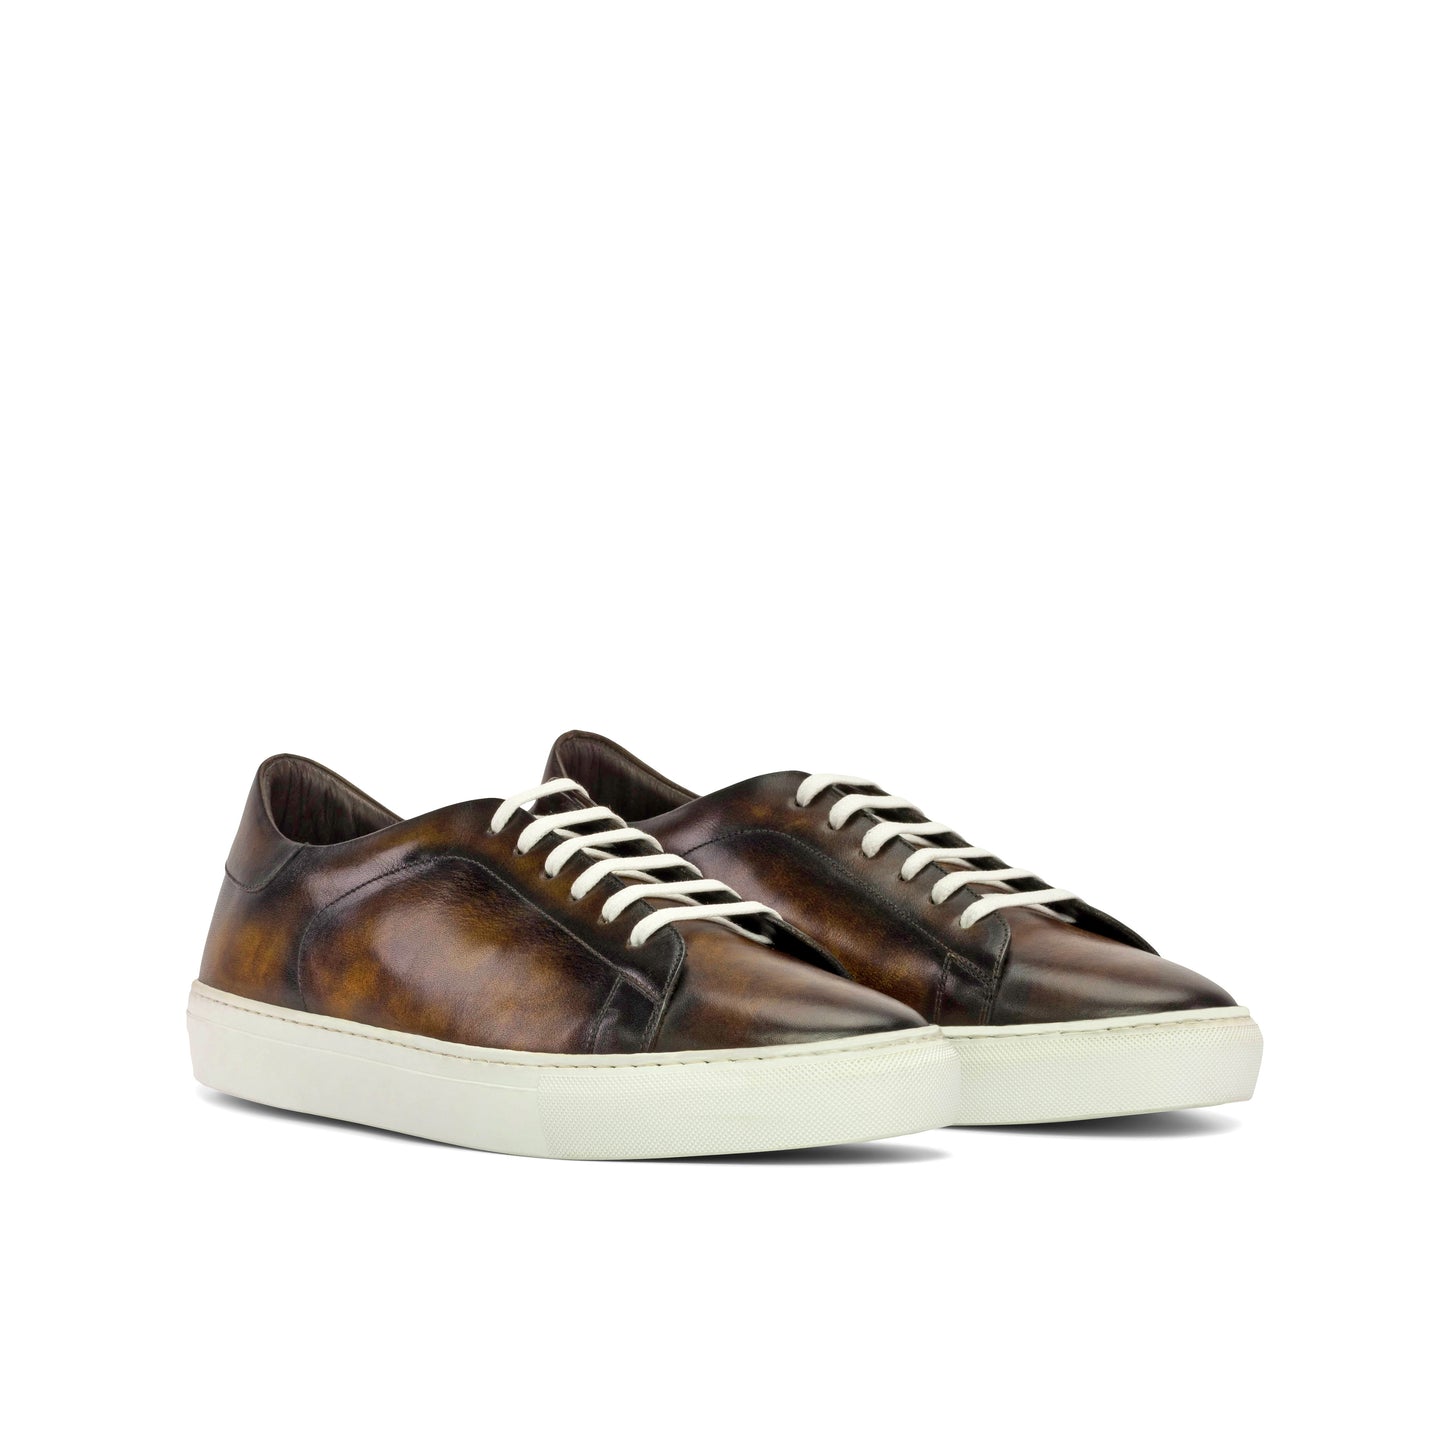 SUITCAFE FastLane Tobacco Patina Leather Trainer Men's Sneaker